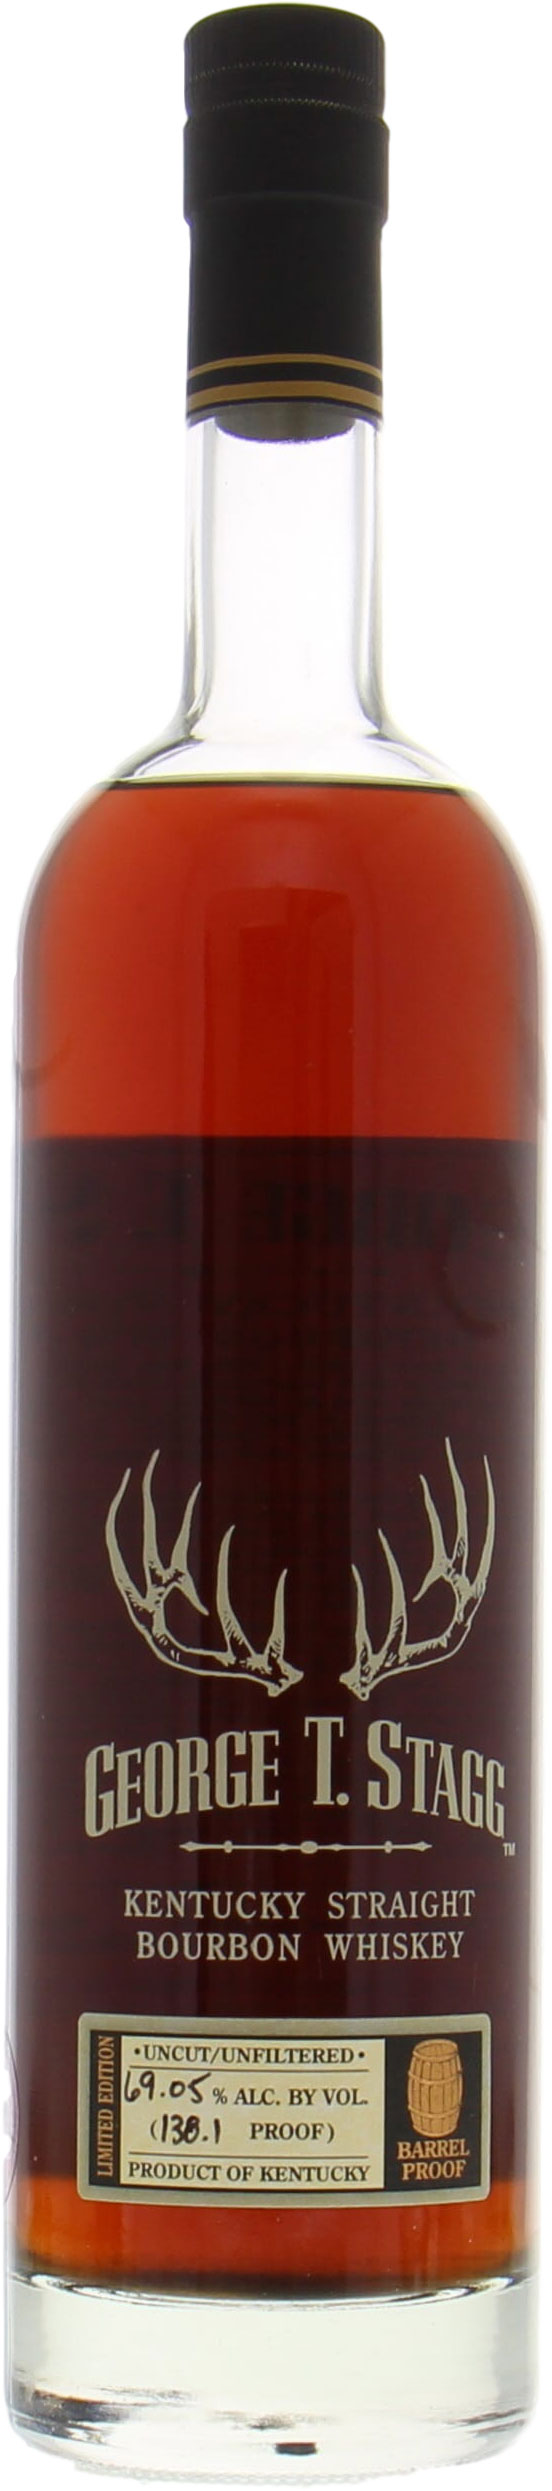 Buffalo Trace - George T. Stagg 16 Old 2014 Release 138.1 Proof 69.05% 1998 Perfect